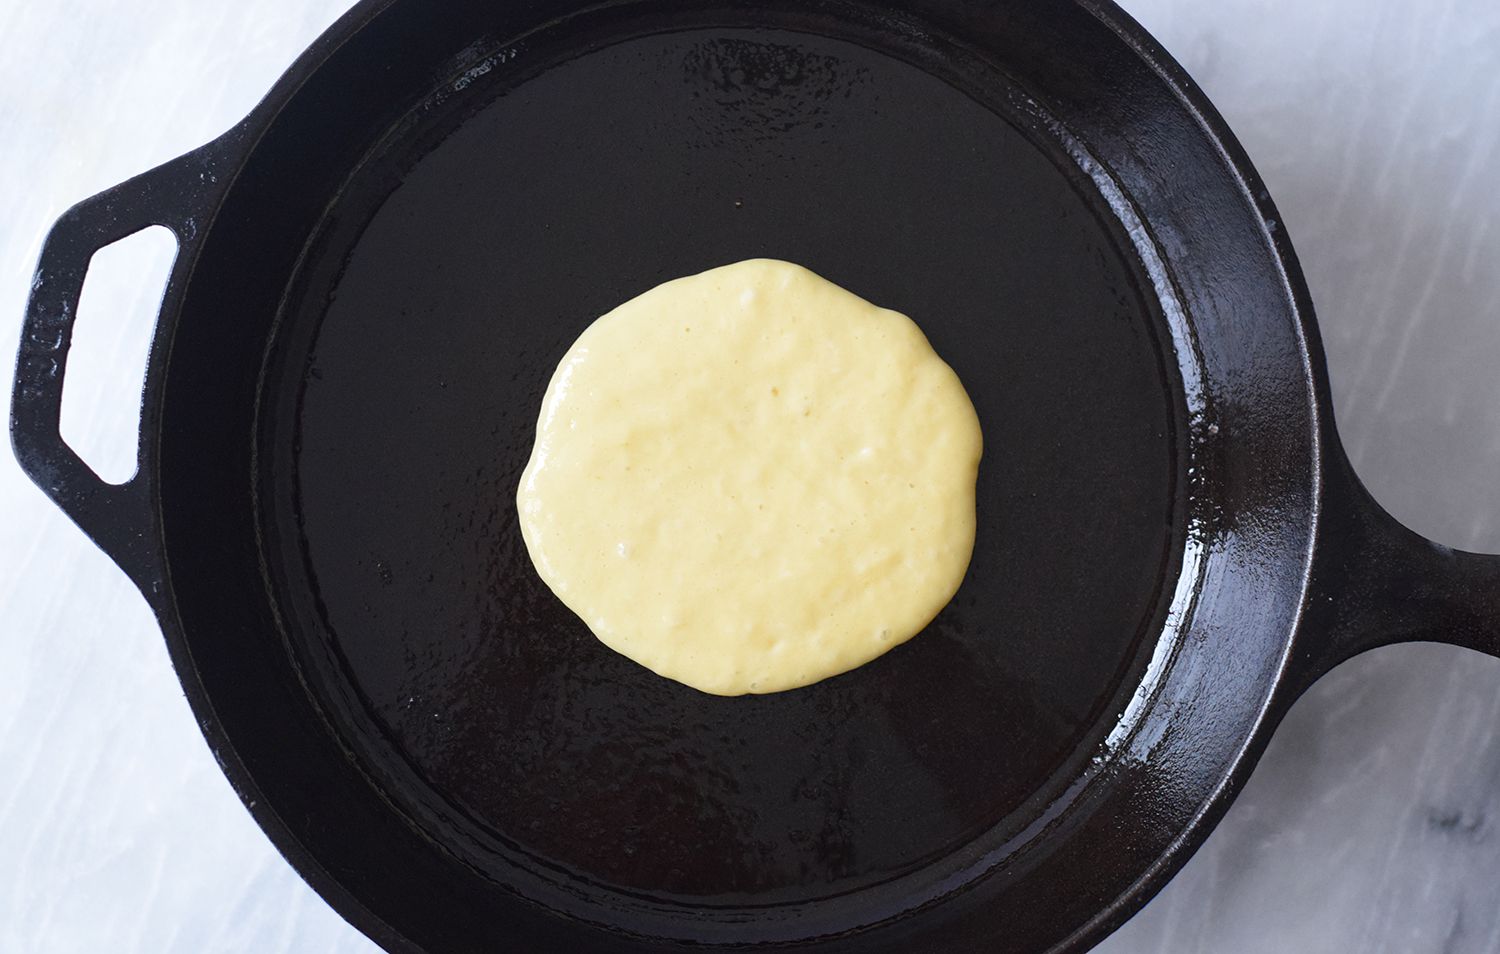 Cook pancakes on a cast-iron pan